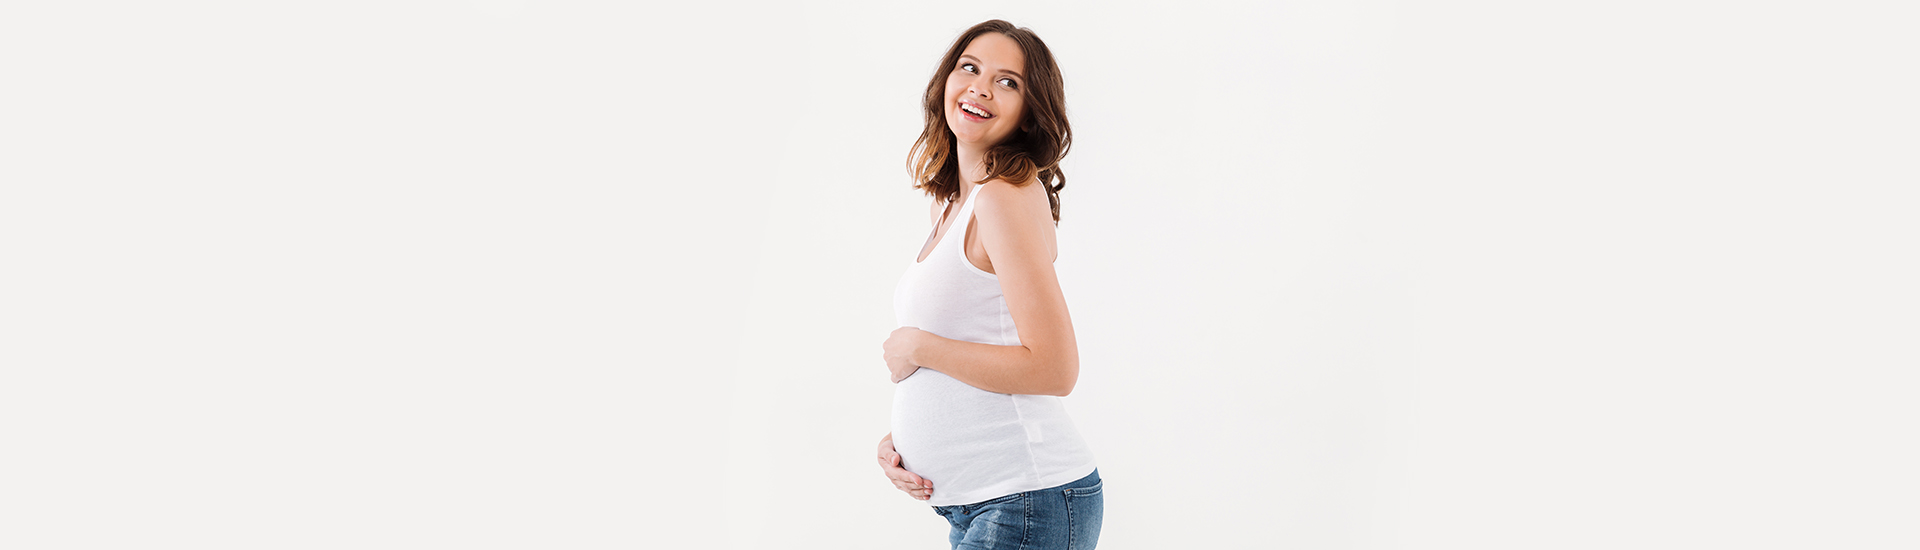 Is It Safe to Visit the Dentist While Pregnant